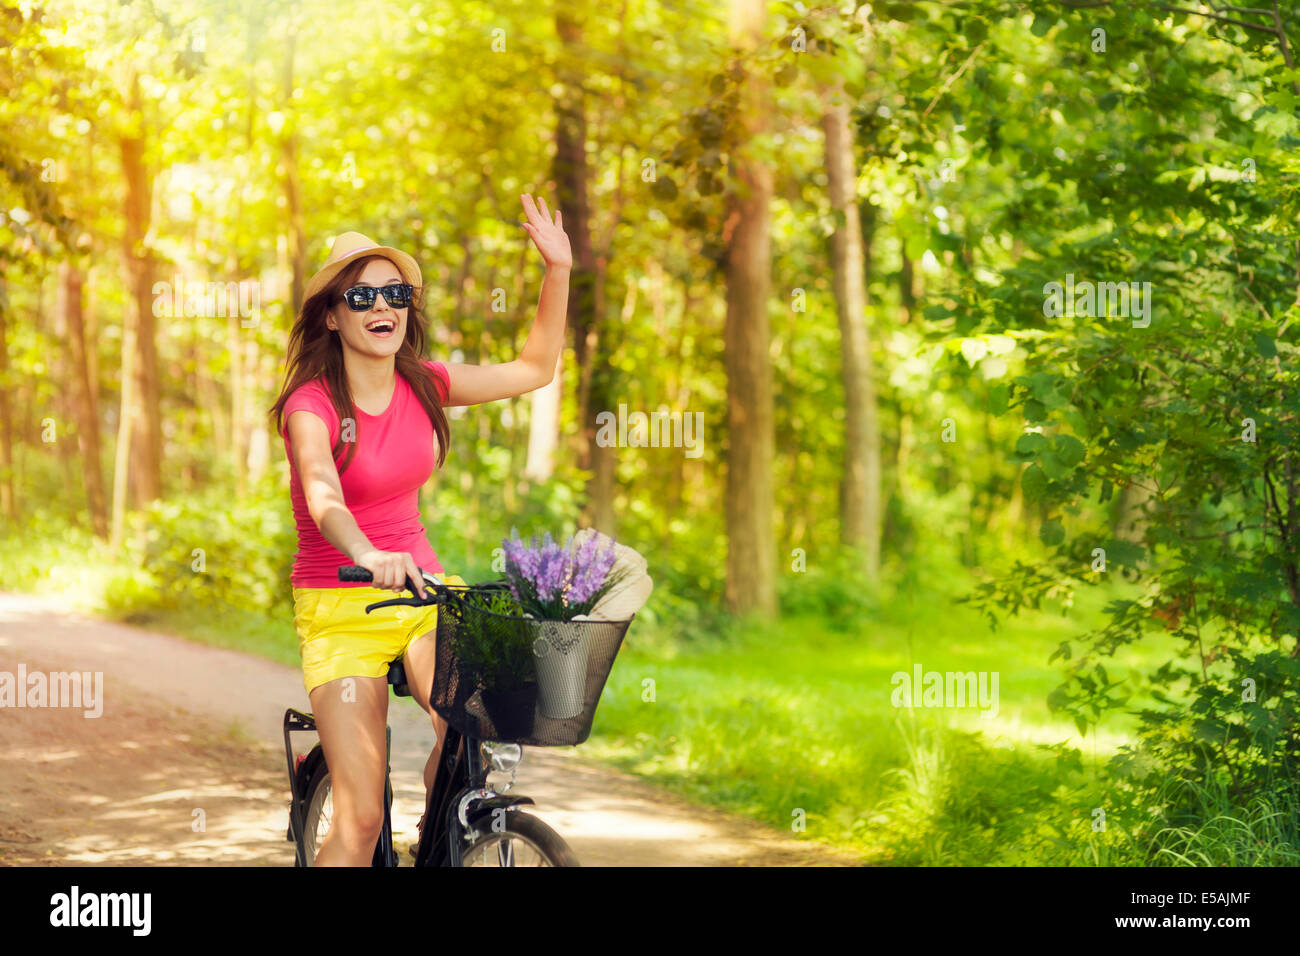 Beautiful woman waving to someone during cycling, Debica, Poland. Stock Photo